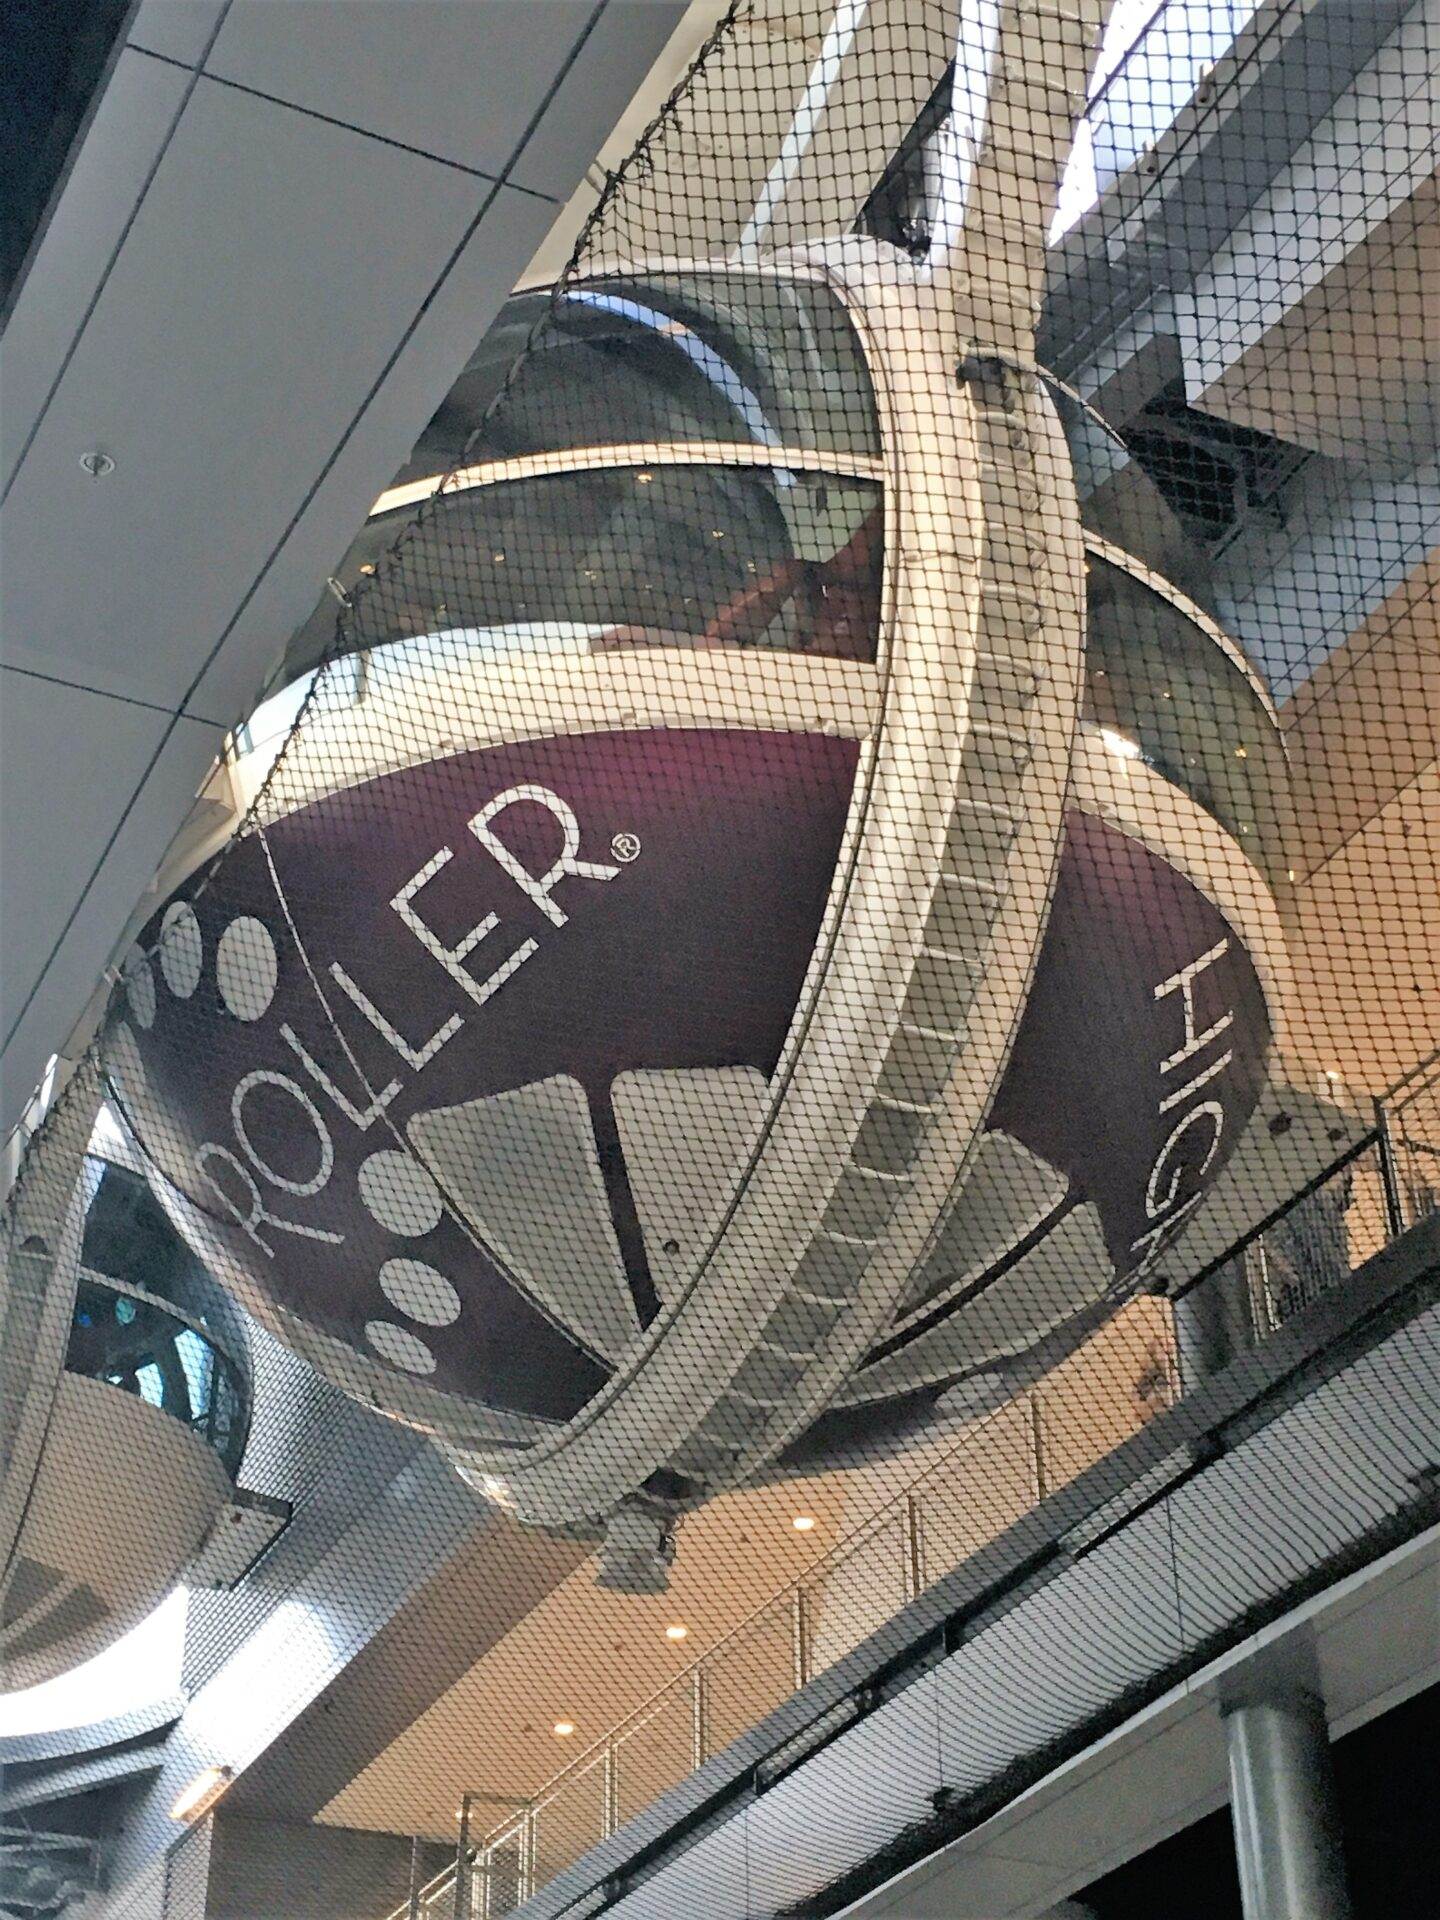 A large ball hanging from the ceiling of a building.